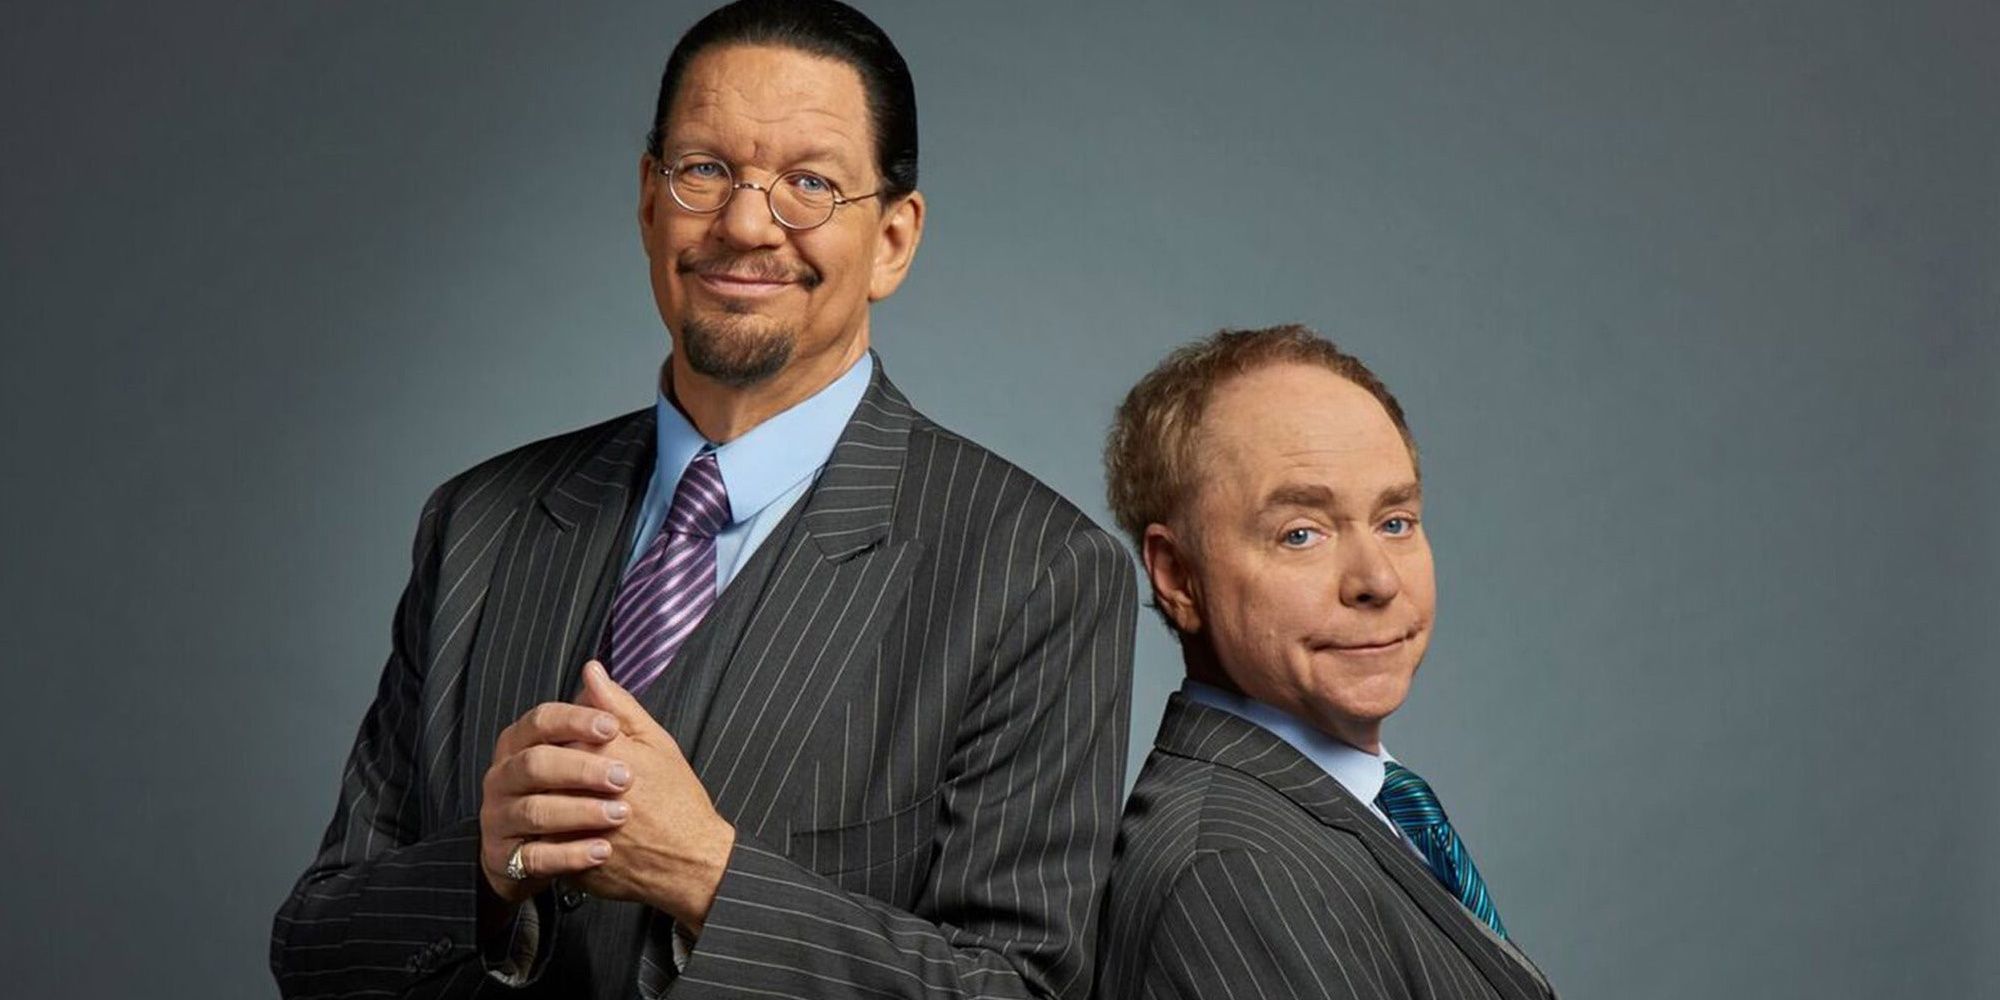 Penn and Teller stand back-to-back in front of a grey background.